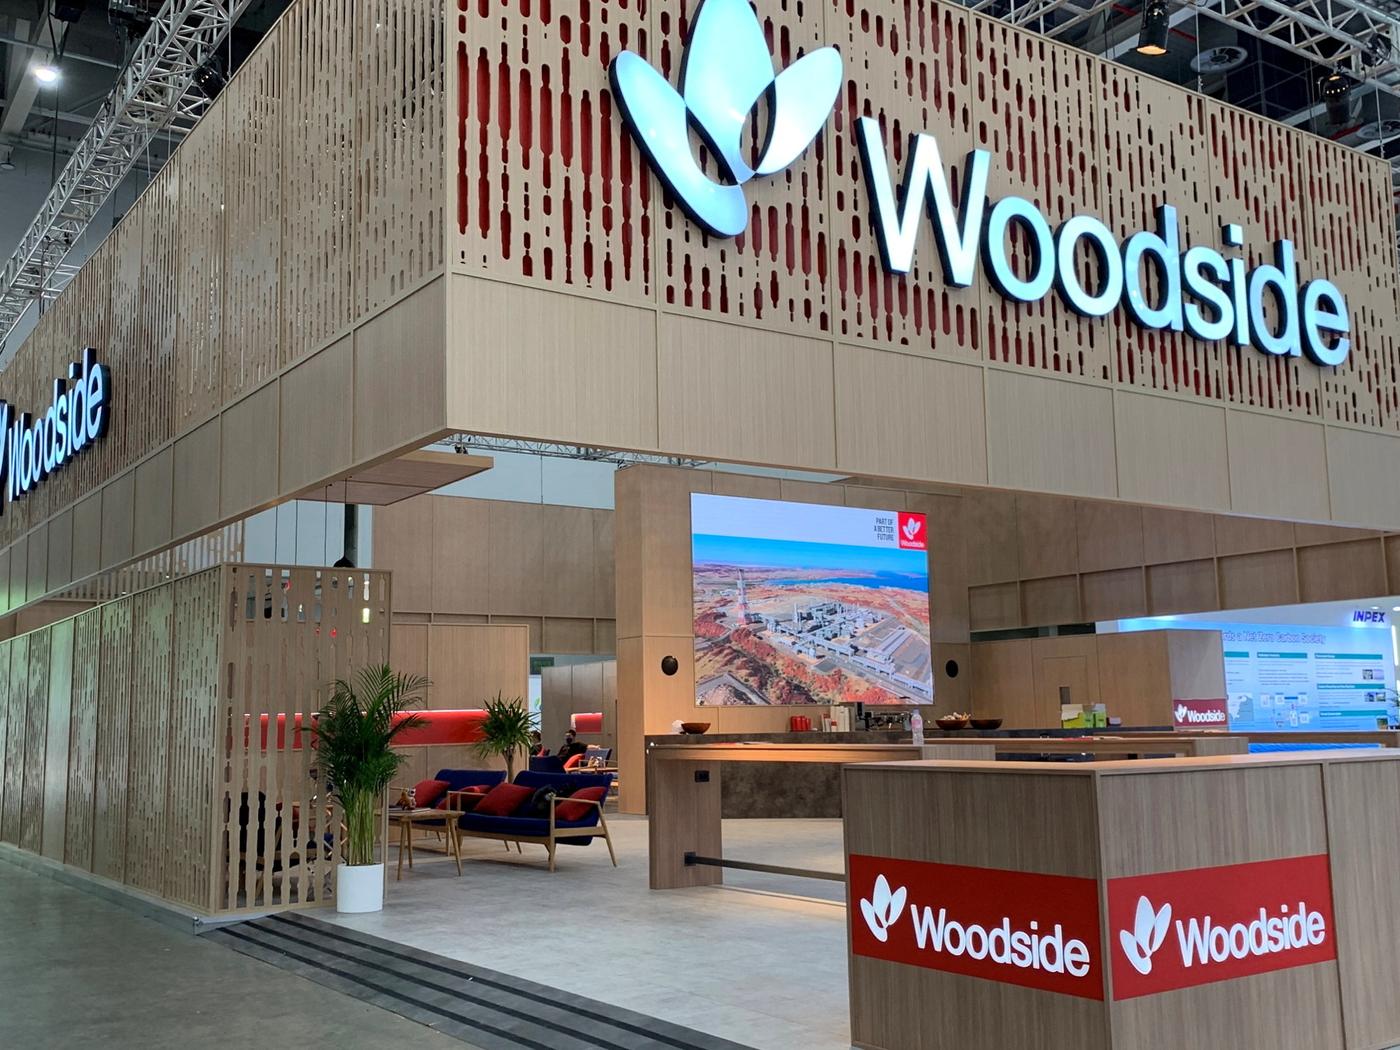 Australia's Woodside Energy Group's exhibition booth is seen at the World Gas Conference 2022 in Daegu, South Korea May 23, 2022. REUTERS/Florence Tan/File Photo